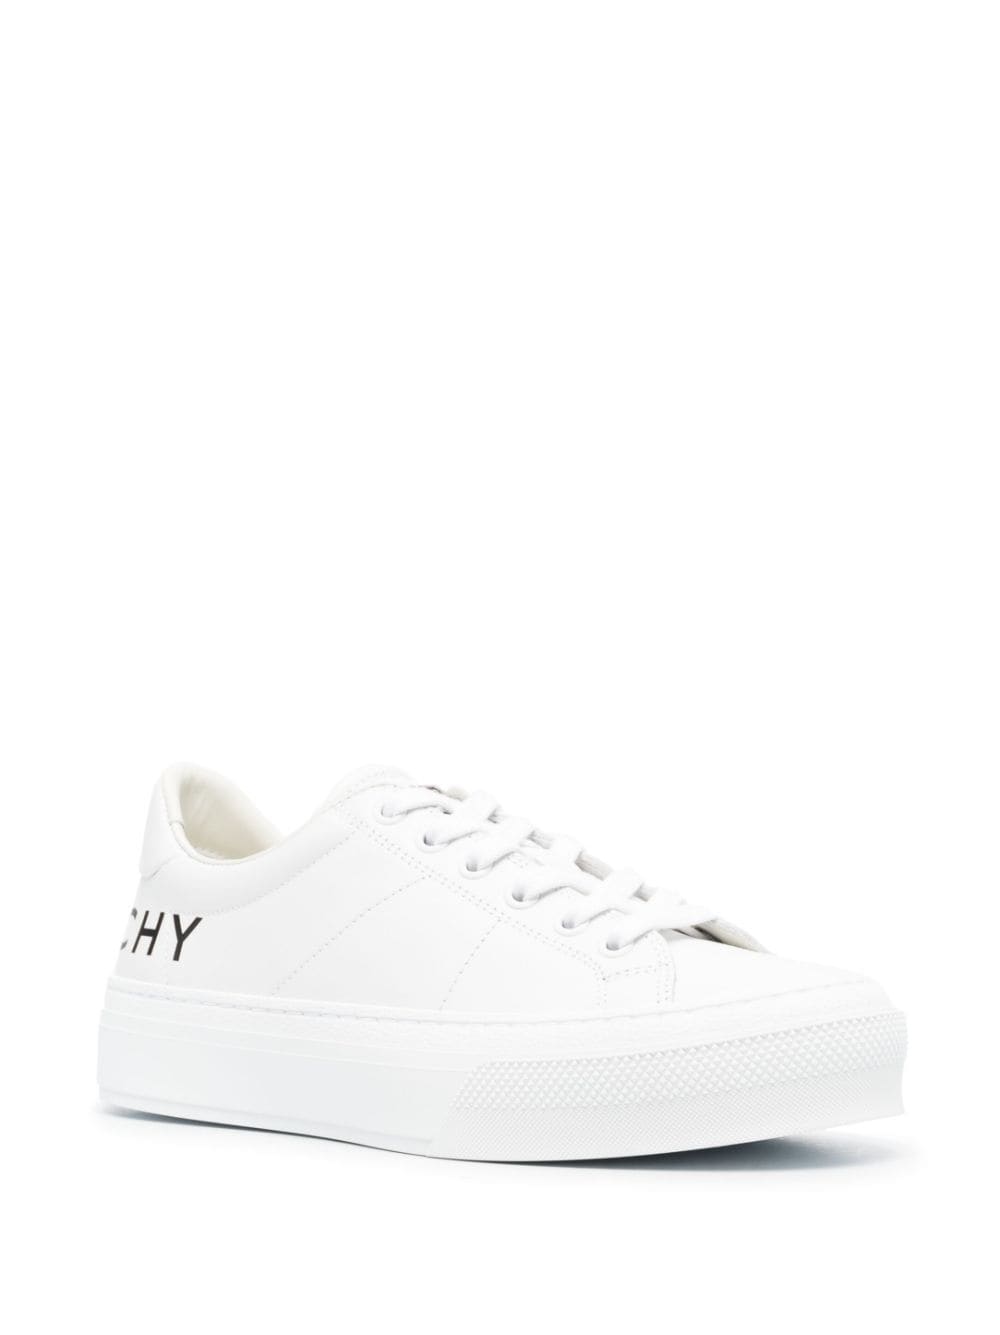 Image 2 of Givenchy logo-print leather low-top sneakers